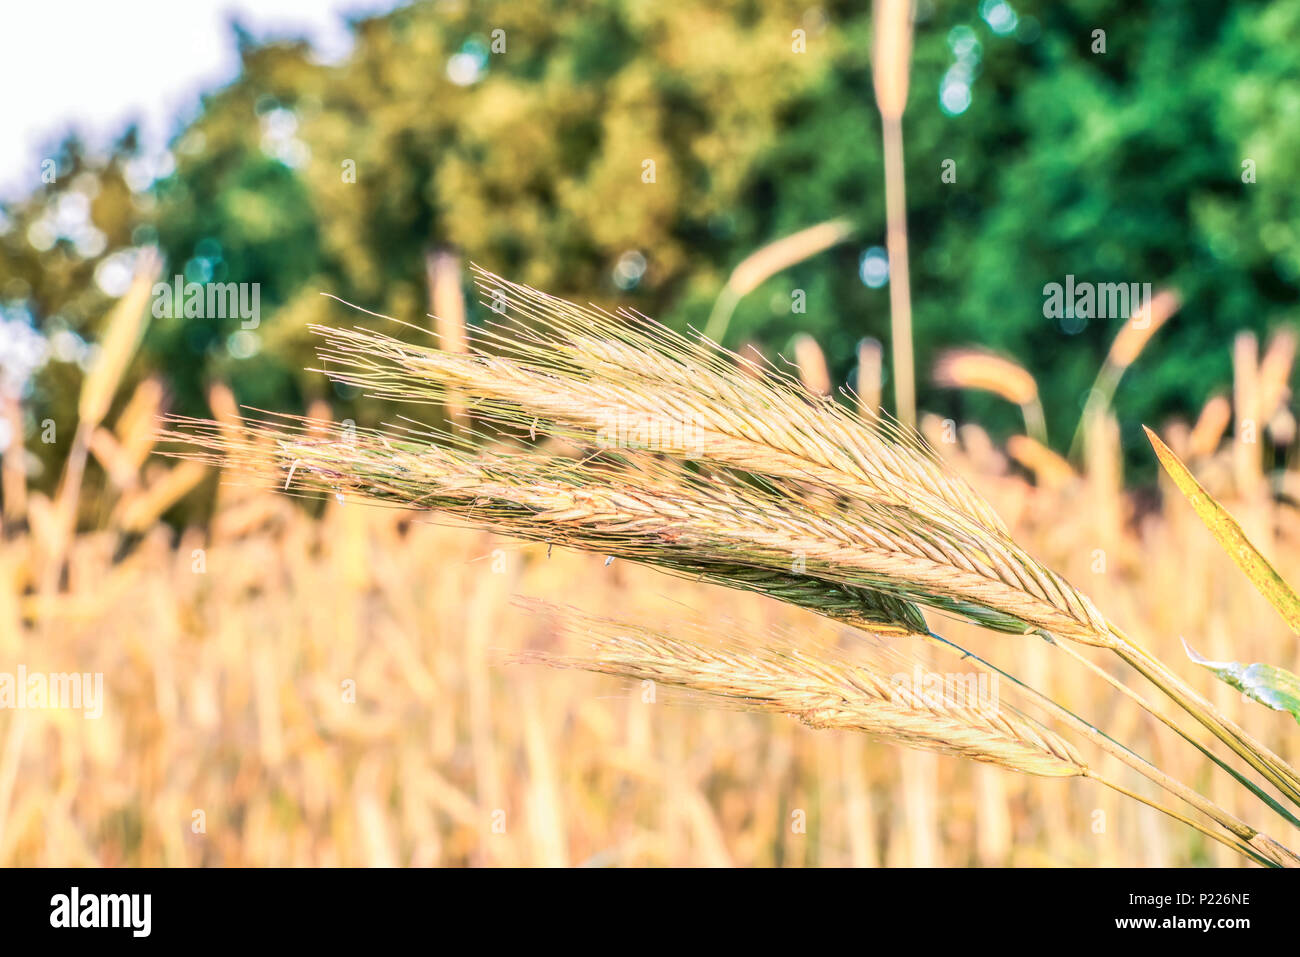 Spikelets of cereals against the background of wheat field Stock Photo